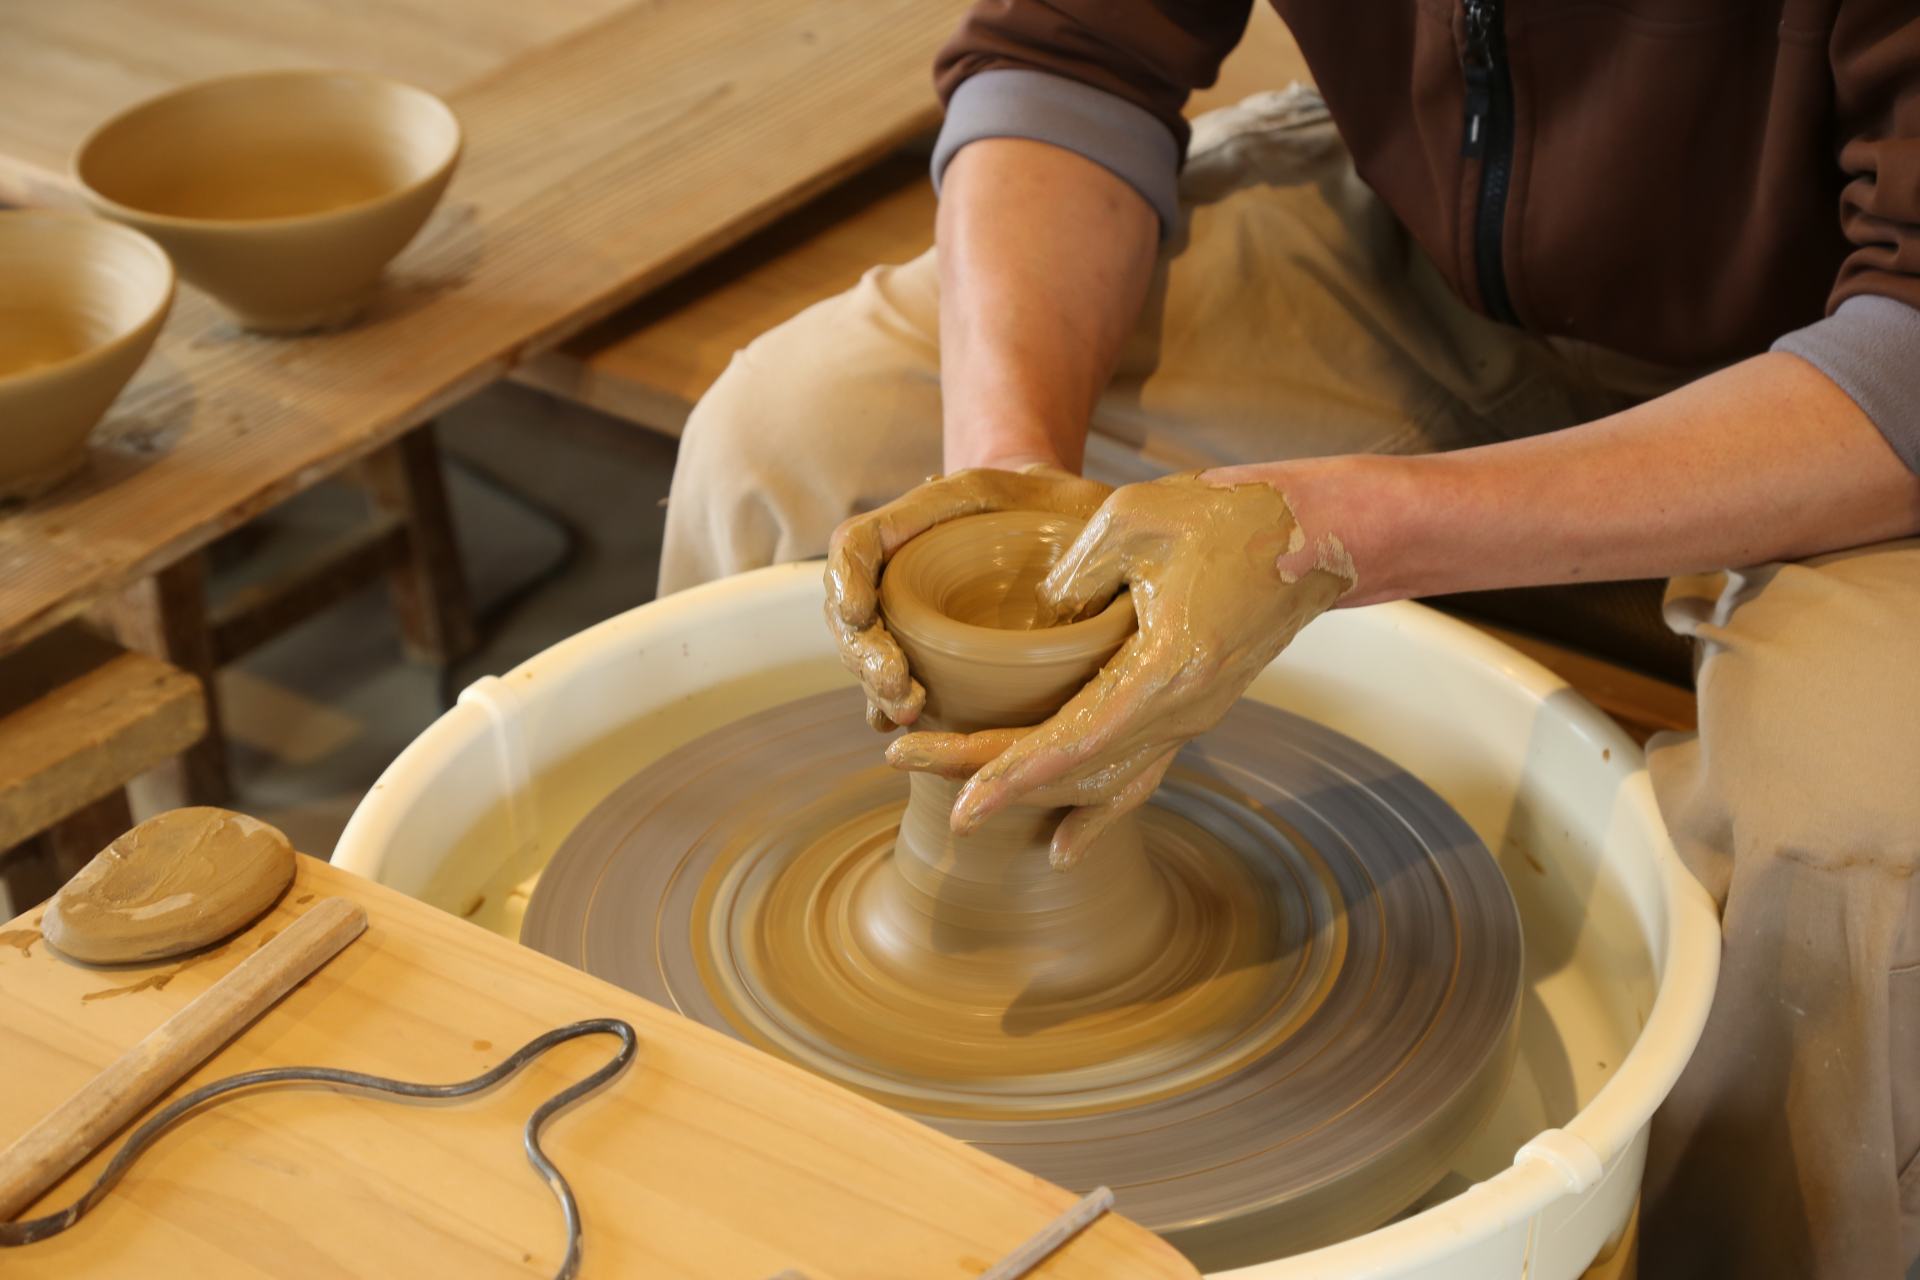 Fascinated by the beautiful striped , we encountered Tokushima Blue.Pottery experience using ”handmade” and ”electric potter's wheel”